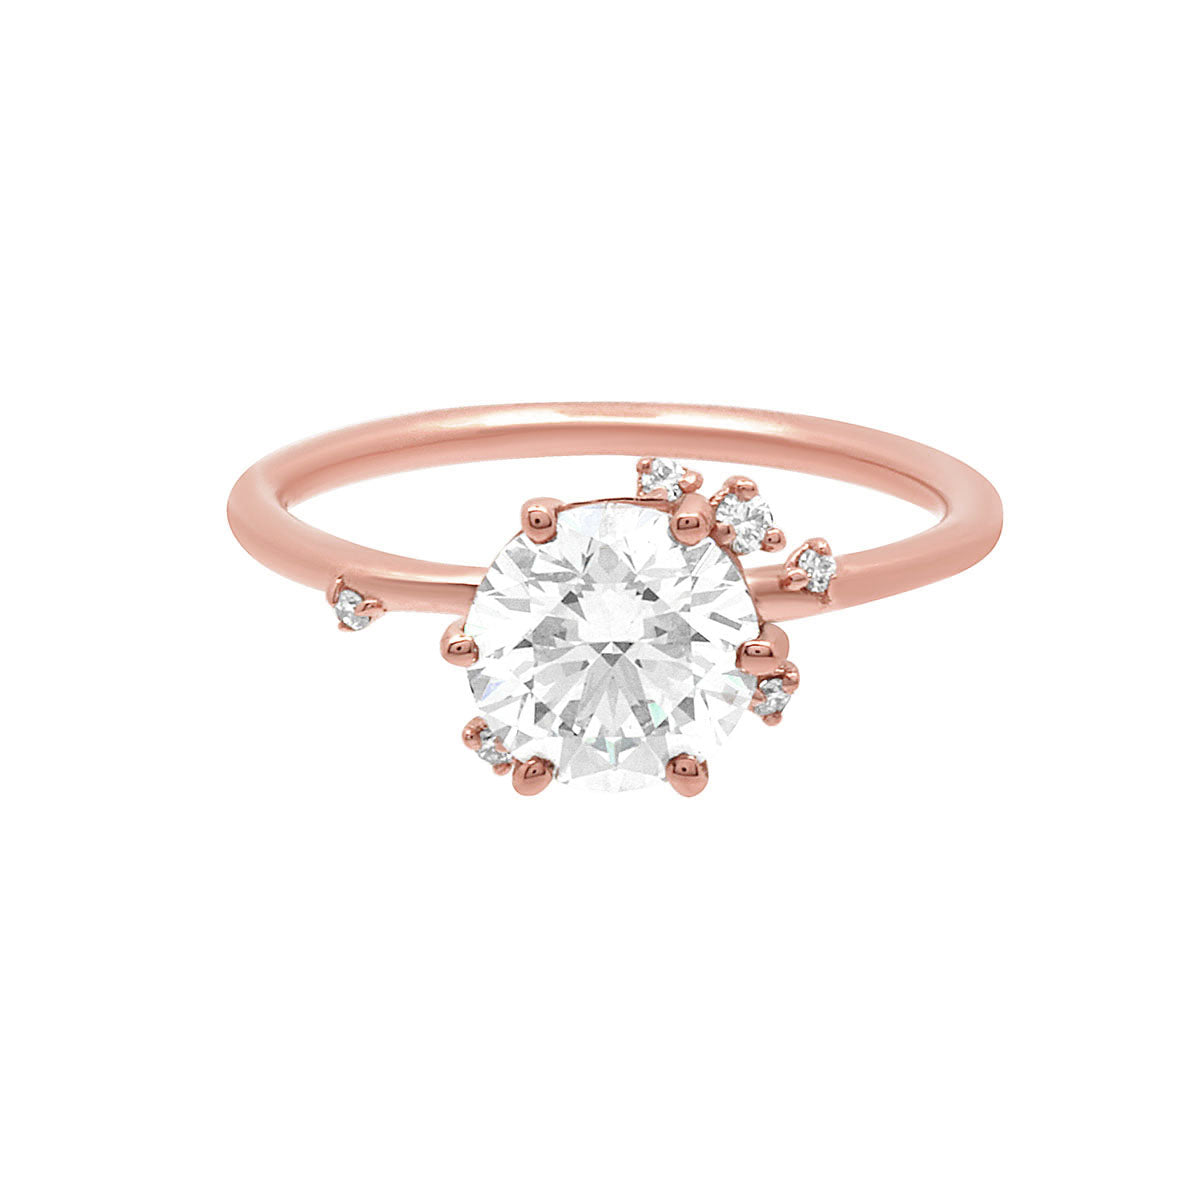 Made To Order Engagement ring in rose gold laying flat